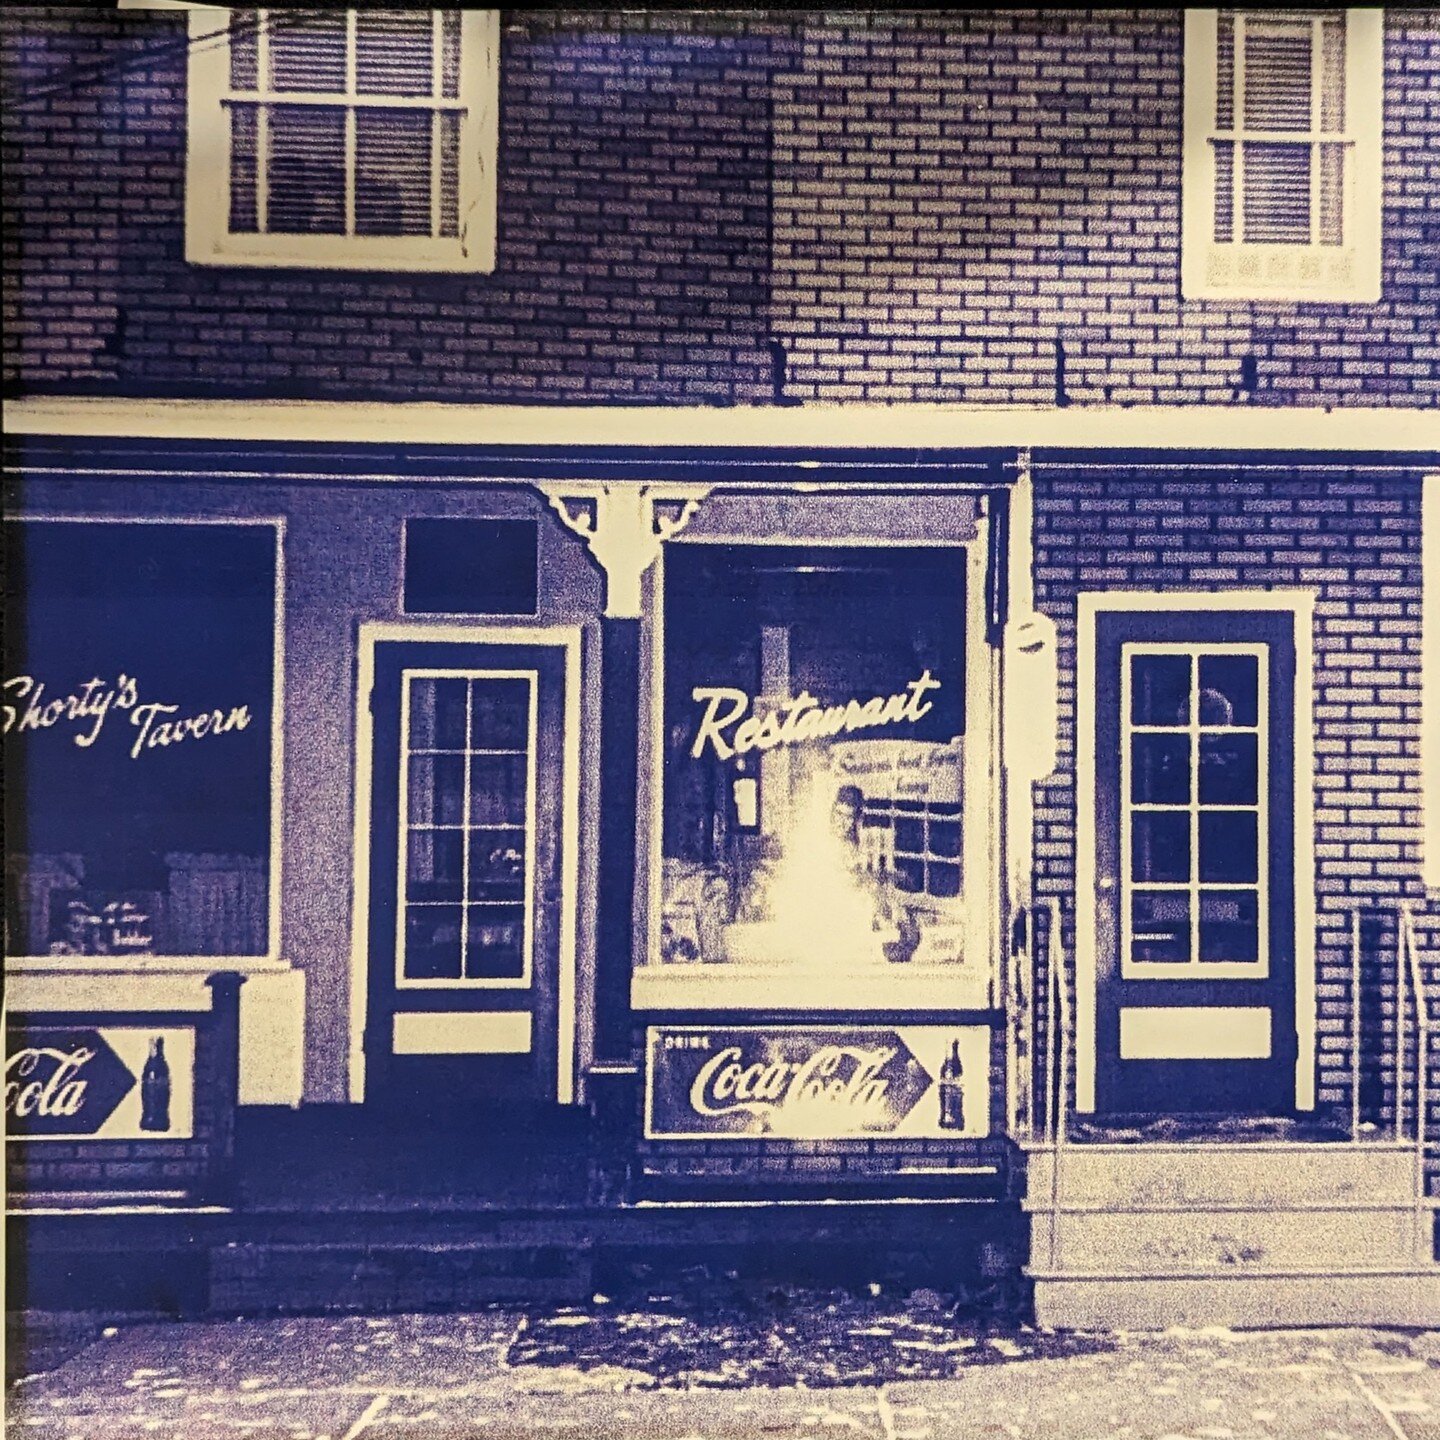 How it all started way back in 1948! Big changes are coming to Broad Street! See you in March!
#AmsterdamNY #518eats